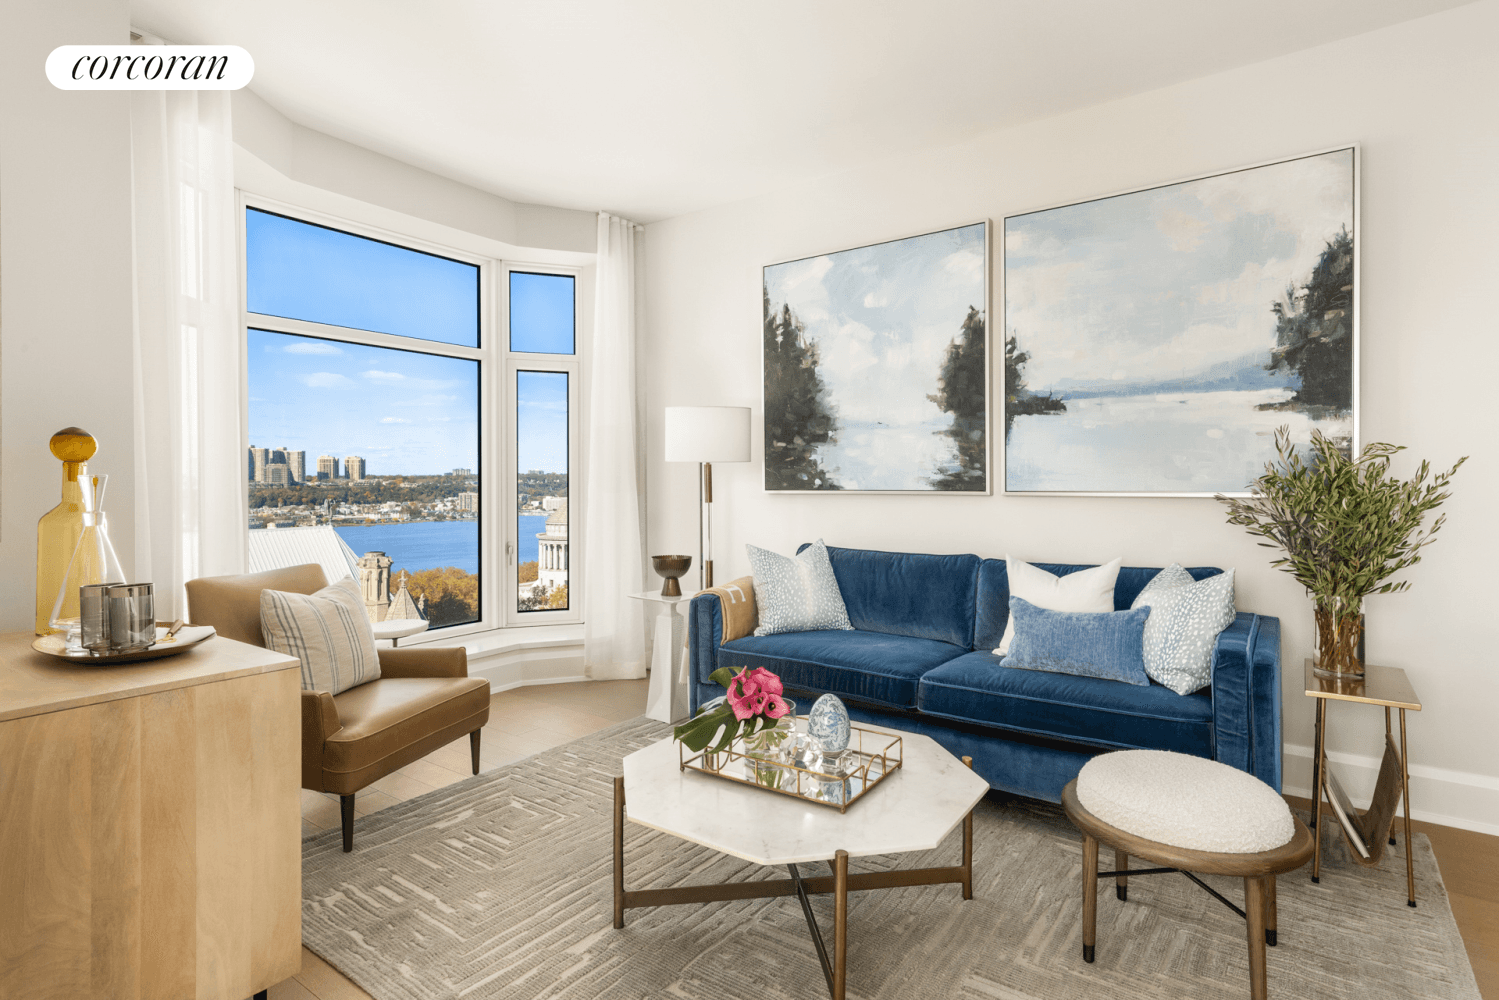 IMMEDIATE OCCUPANCYA charming 807 square foot one bedroom home, Residence 30C enjoys sweeping western views over the iconic spire of Riverside Church, the Hudson River, and the George Washington Bridge.